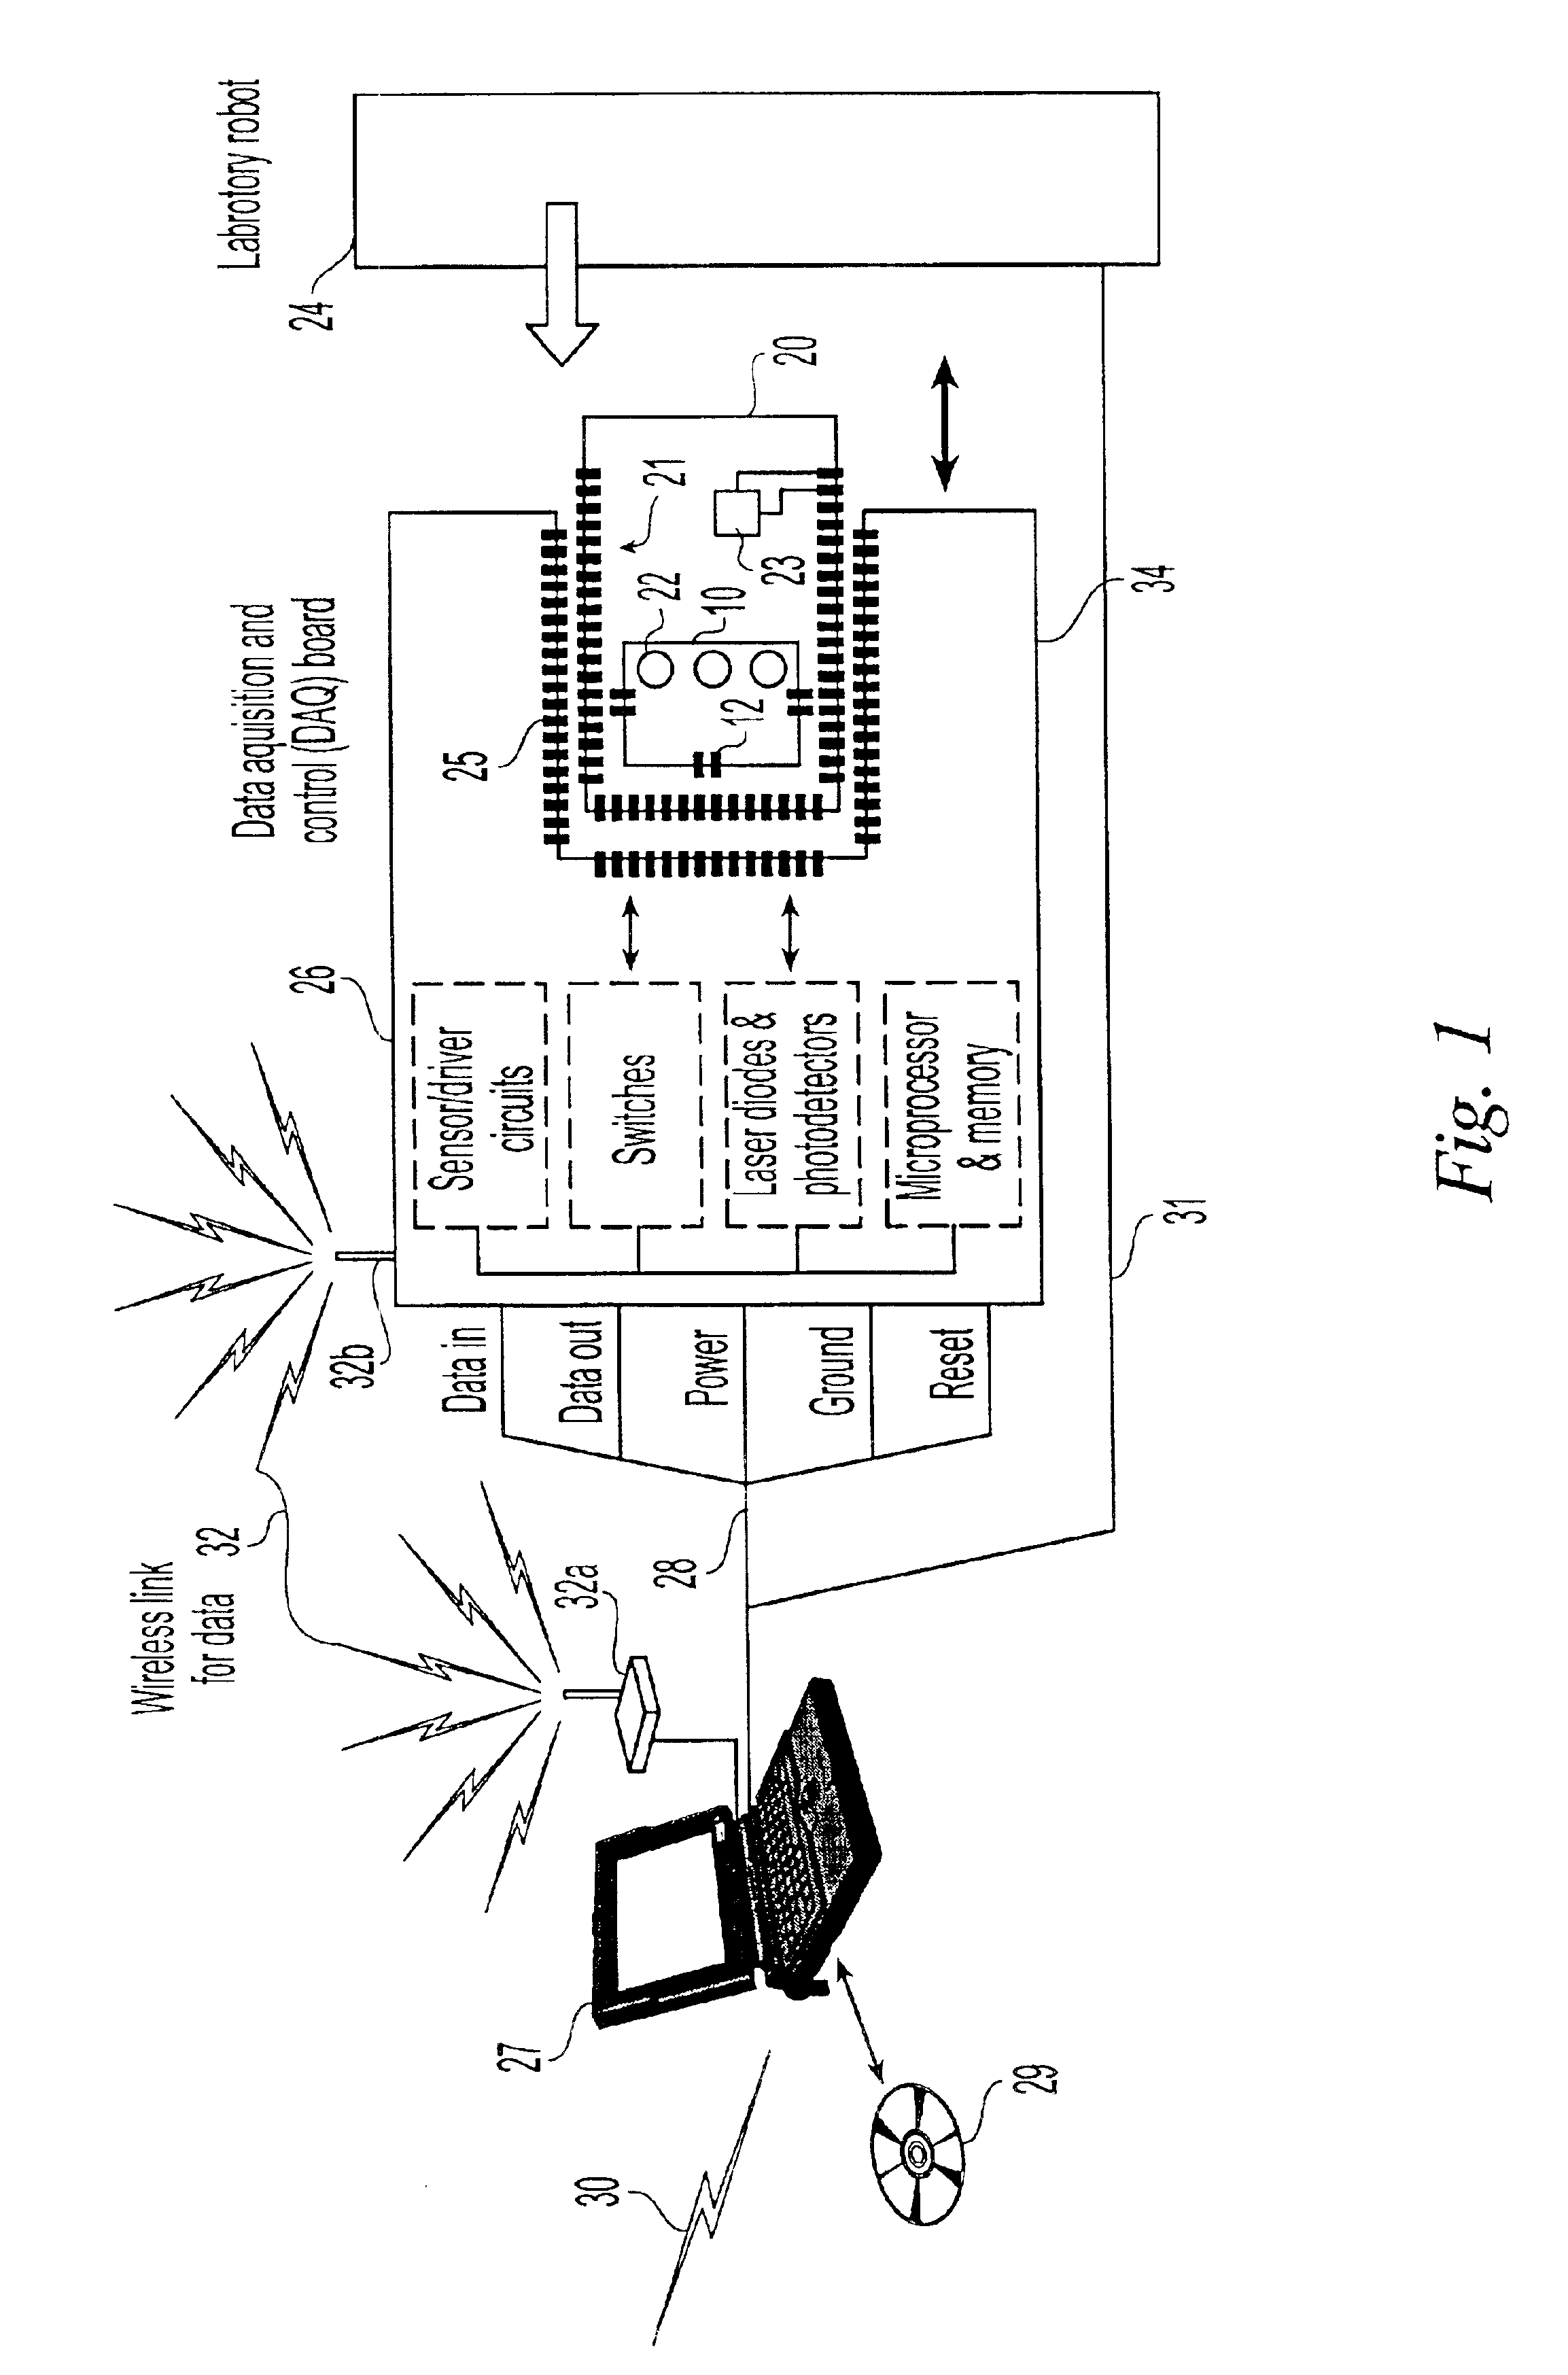 Microfluidic devices having a reduced number of input and output connections